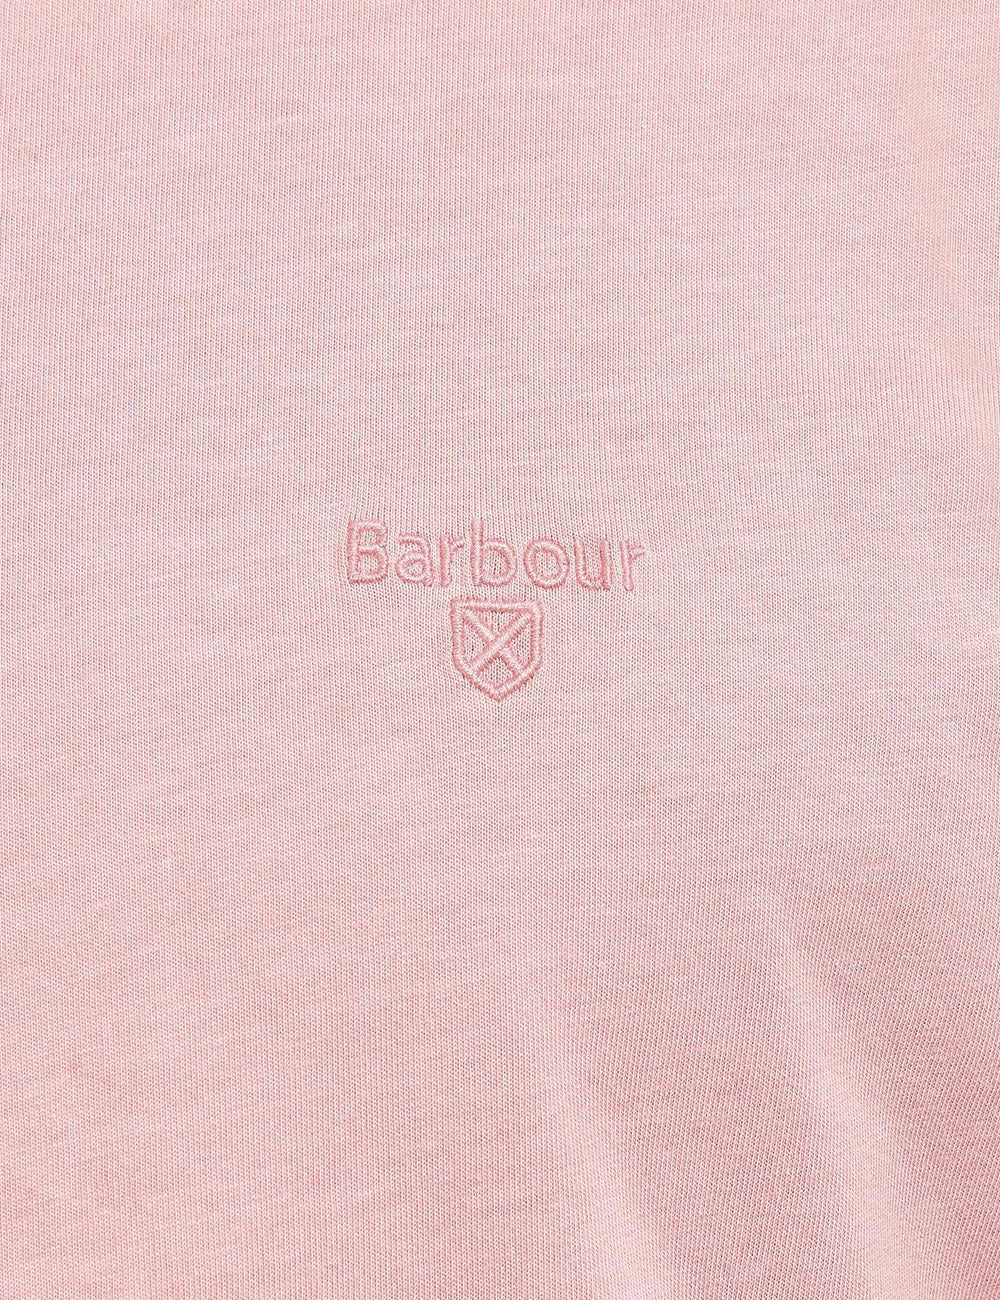 Close up of the Barbour and Shield embroidery on the chest of the Garment Dyed T-Shirt